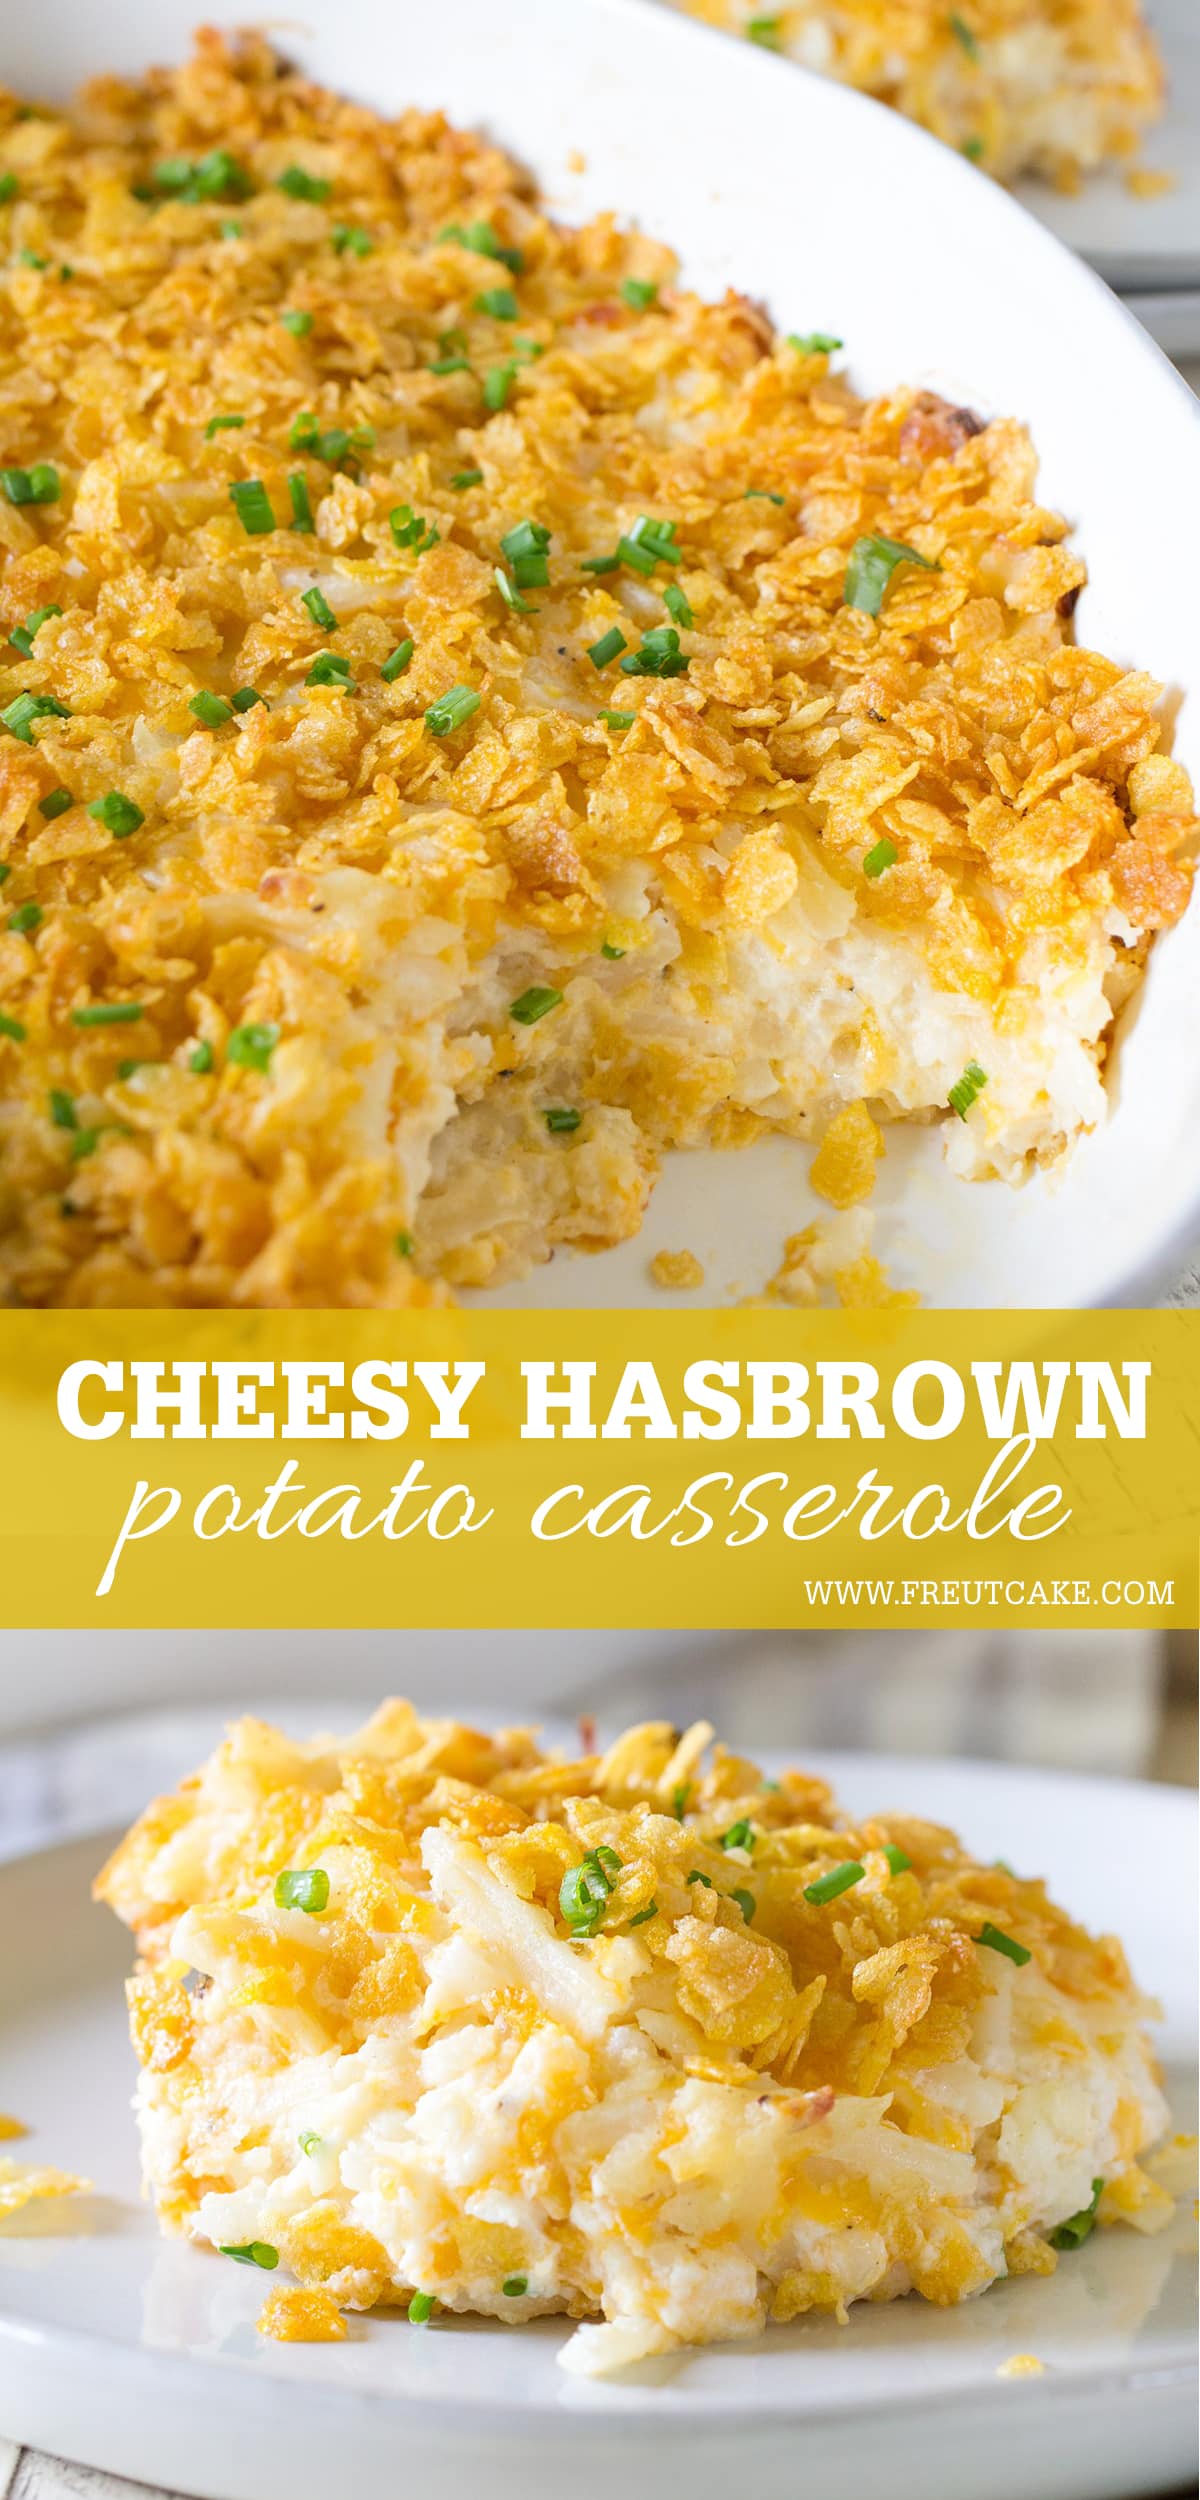 Cheesy Hashbrown Potato Casserole with a corn flake topping